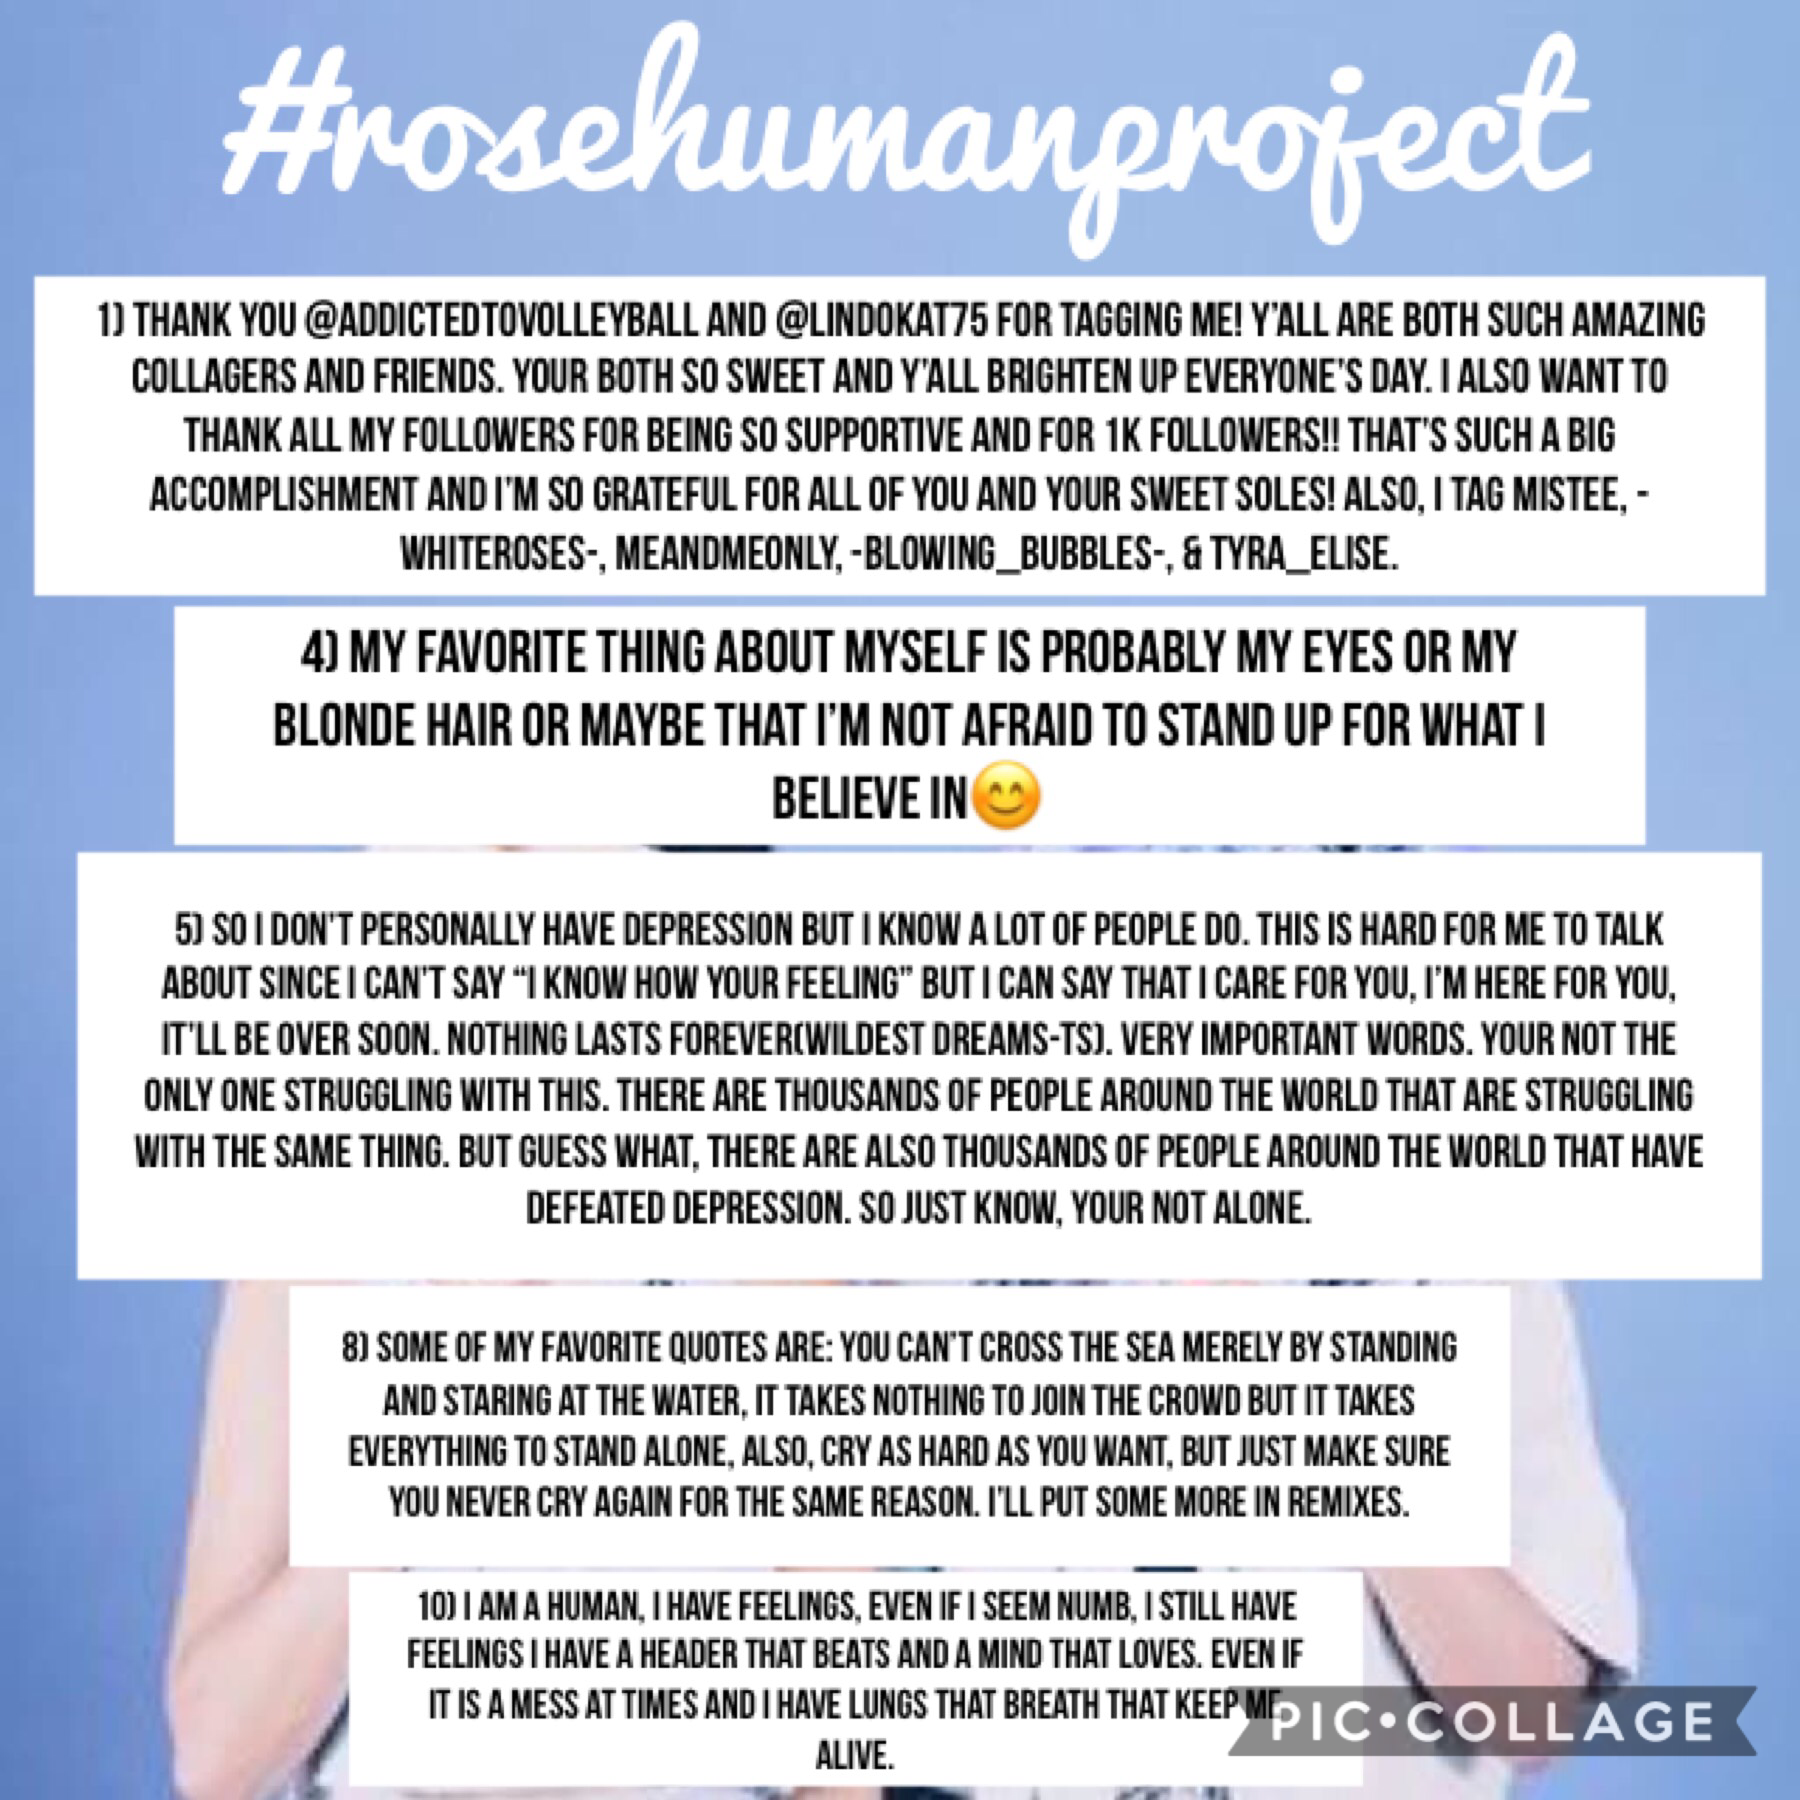 #rosehumanproject
The people I tagged are in the post. I’m posting my 1K giveaway soon so get ready for that! If not already follow my extra account(summer-dayzXtra) QOTD:Fav app on ur device? AOTD: PC, YouCam, & messages/FaceTime